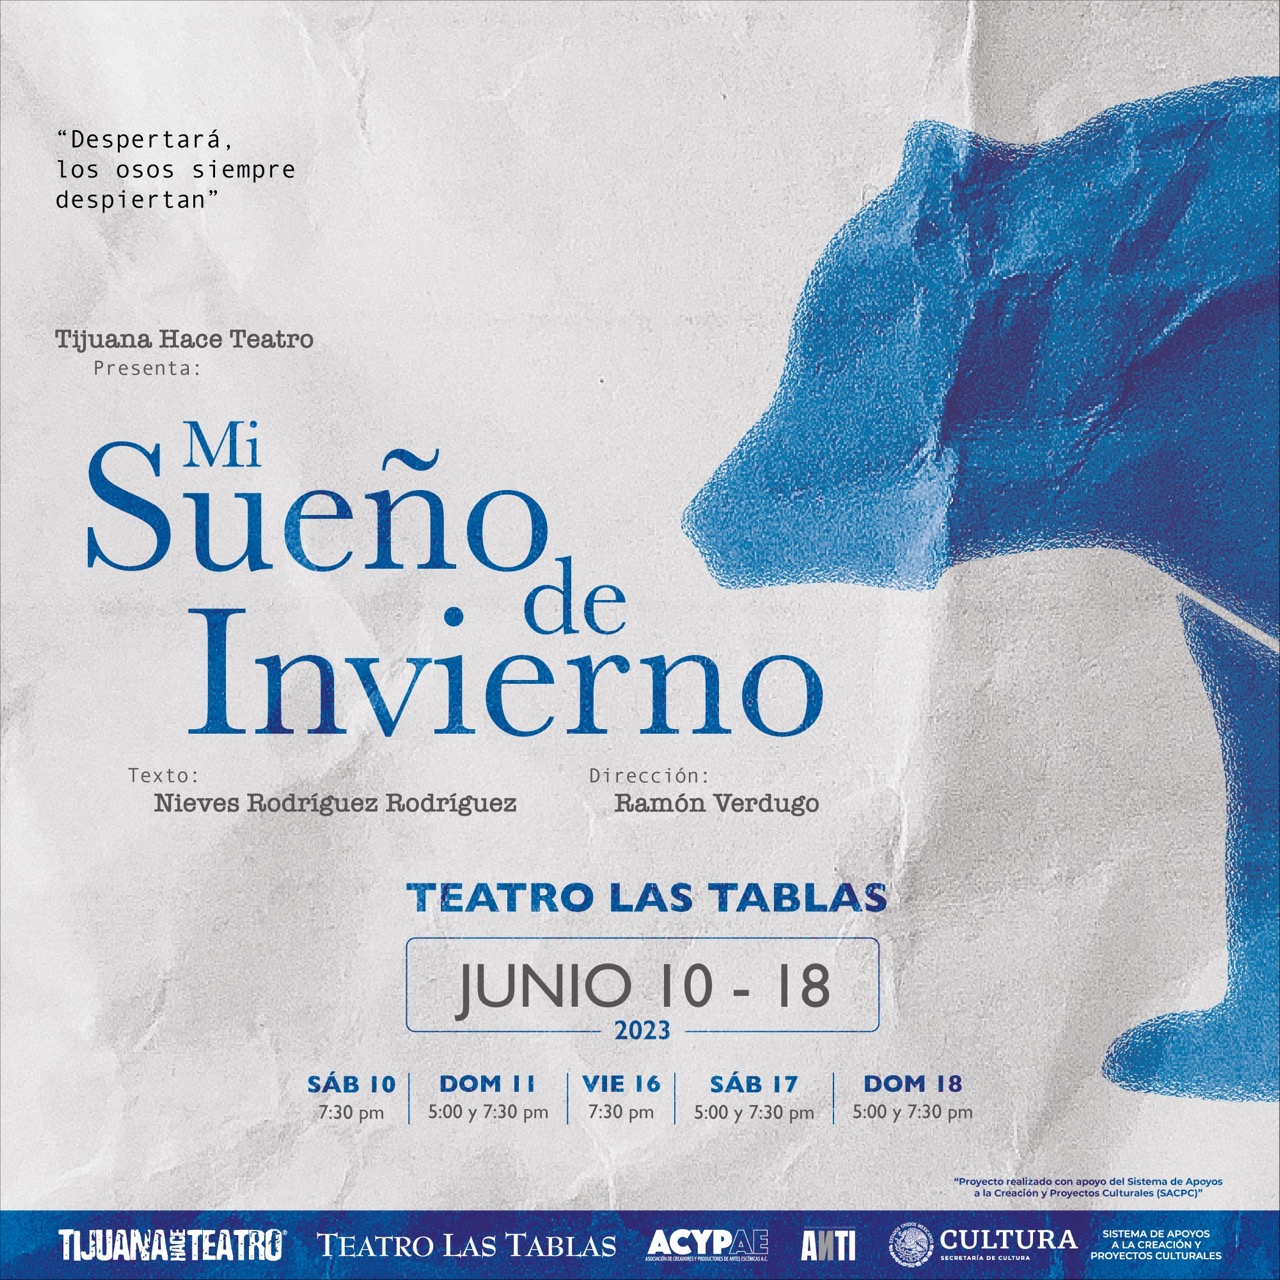 ASSITEJ Spain’s Winning Text Premieres in Mexico